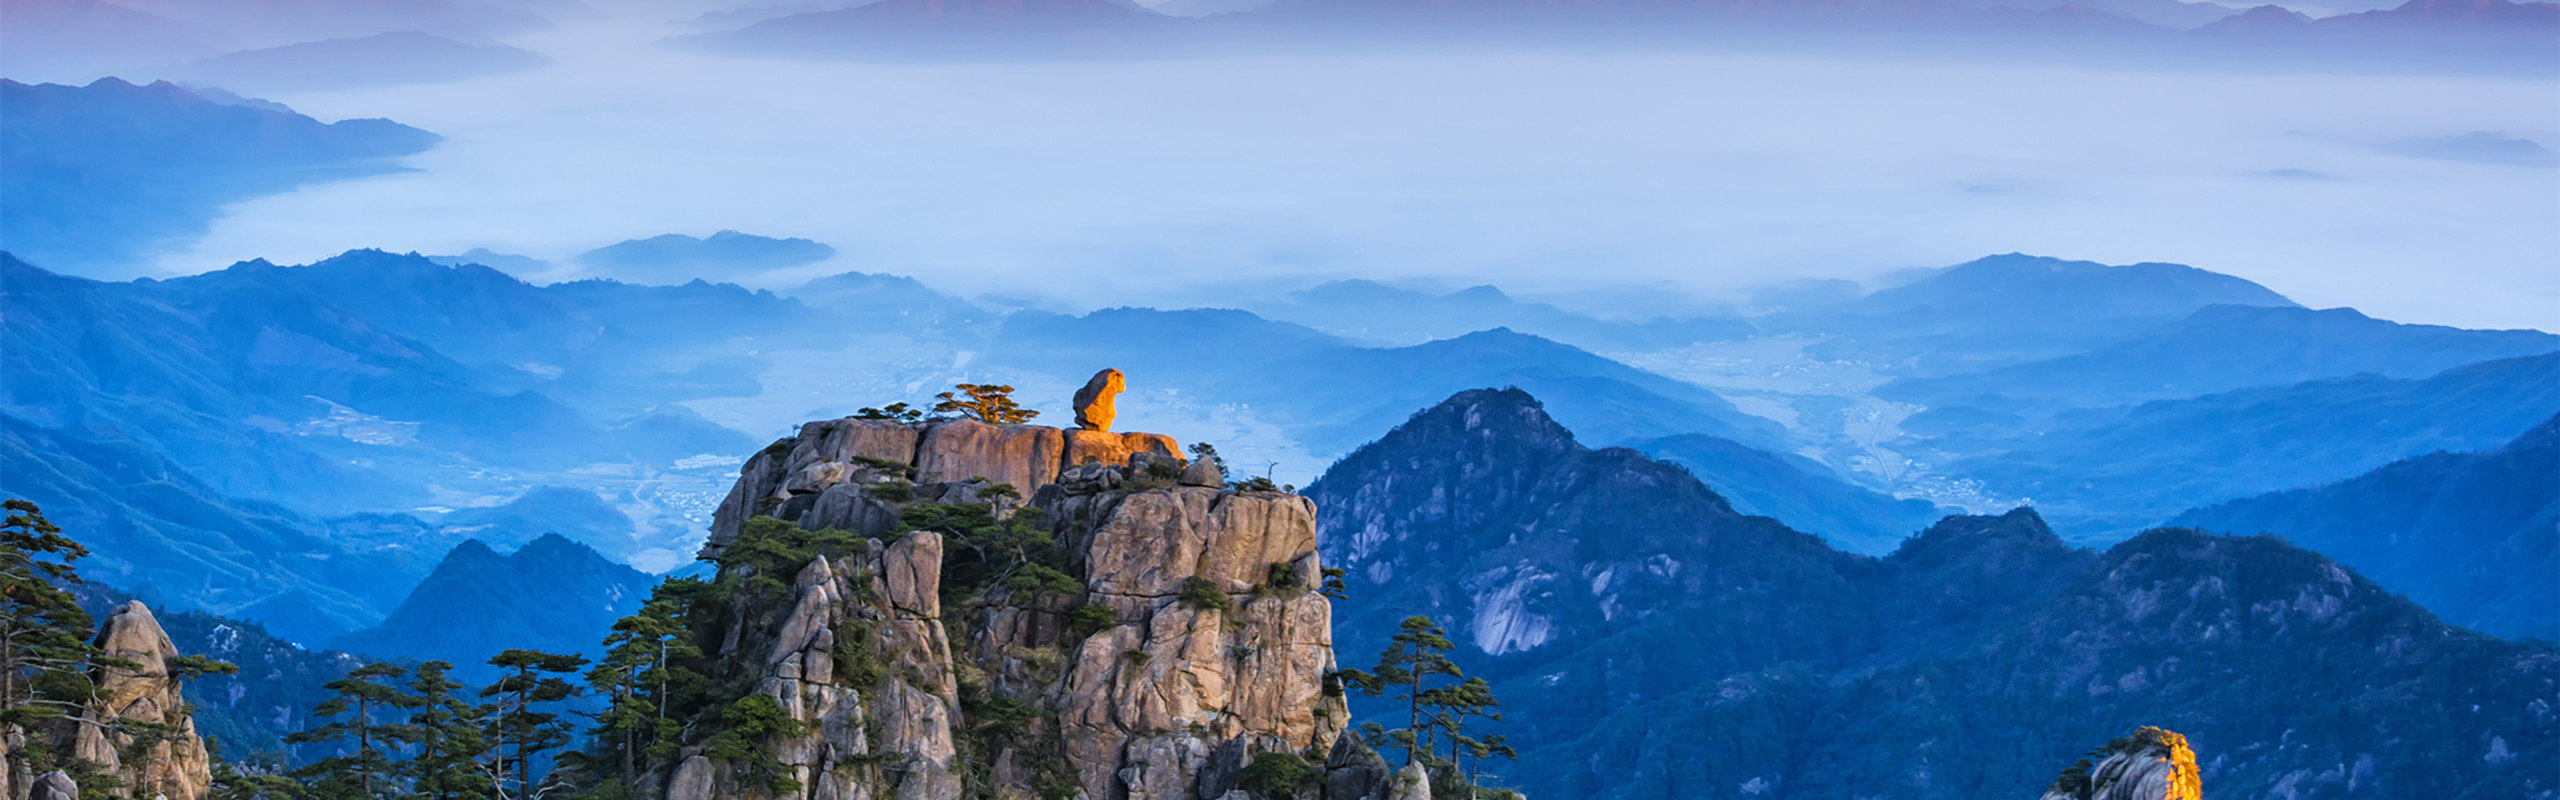 Huangshan Small Group Day Tours